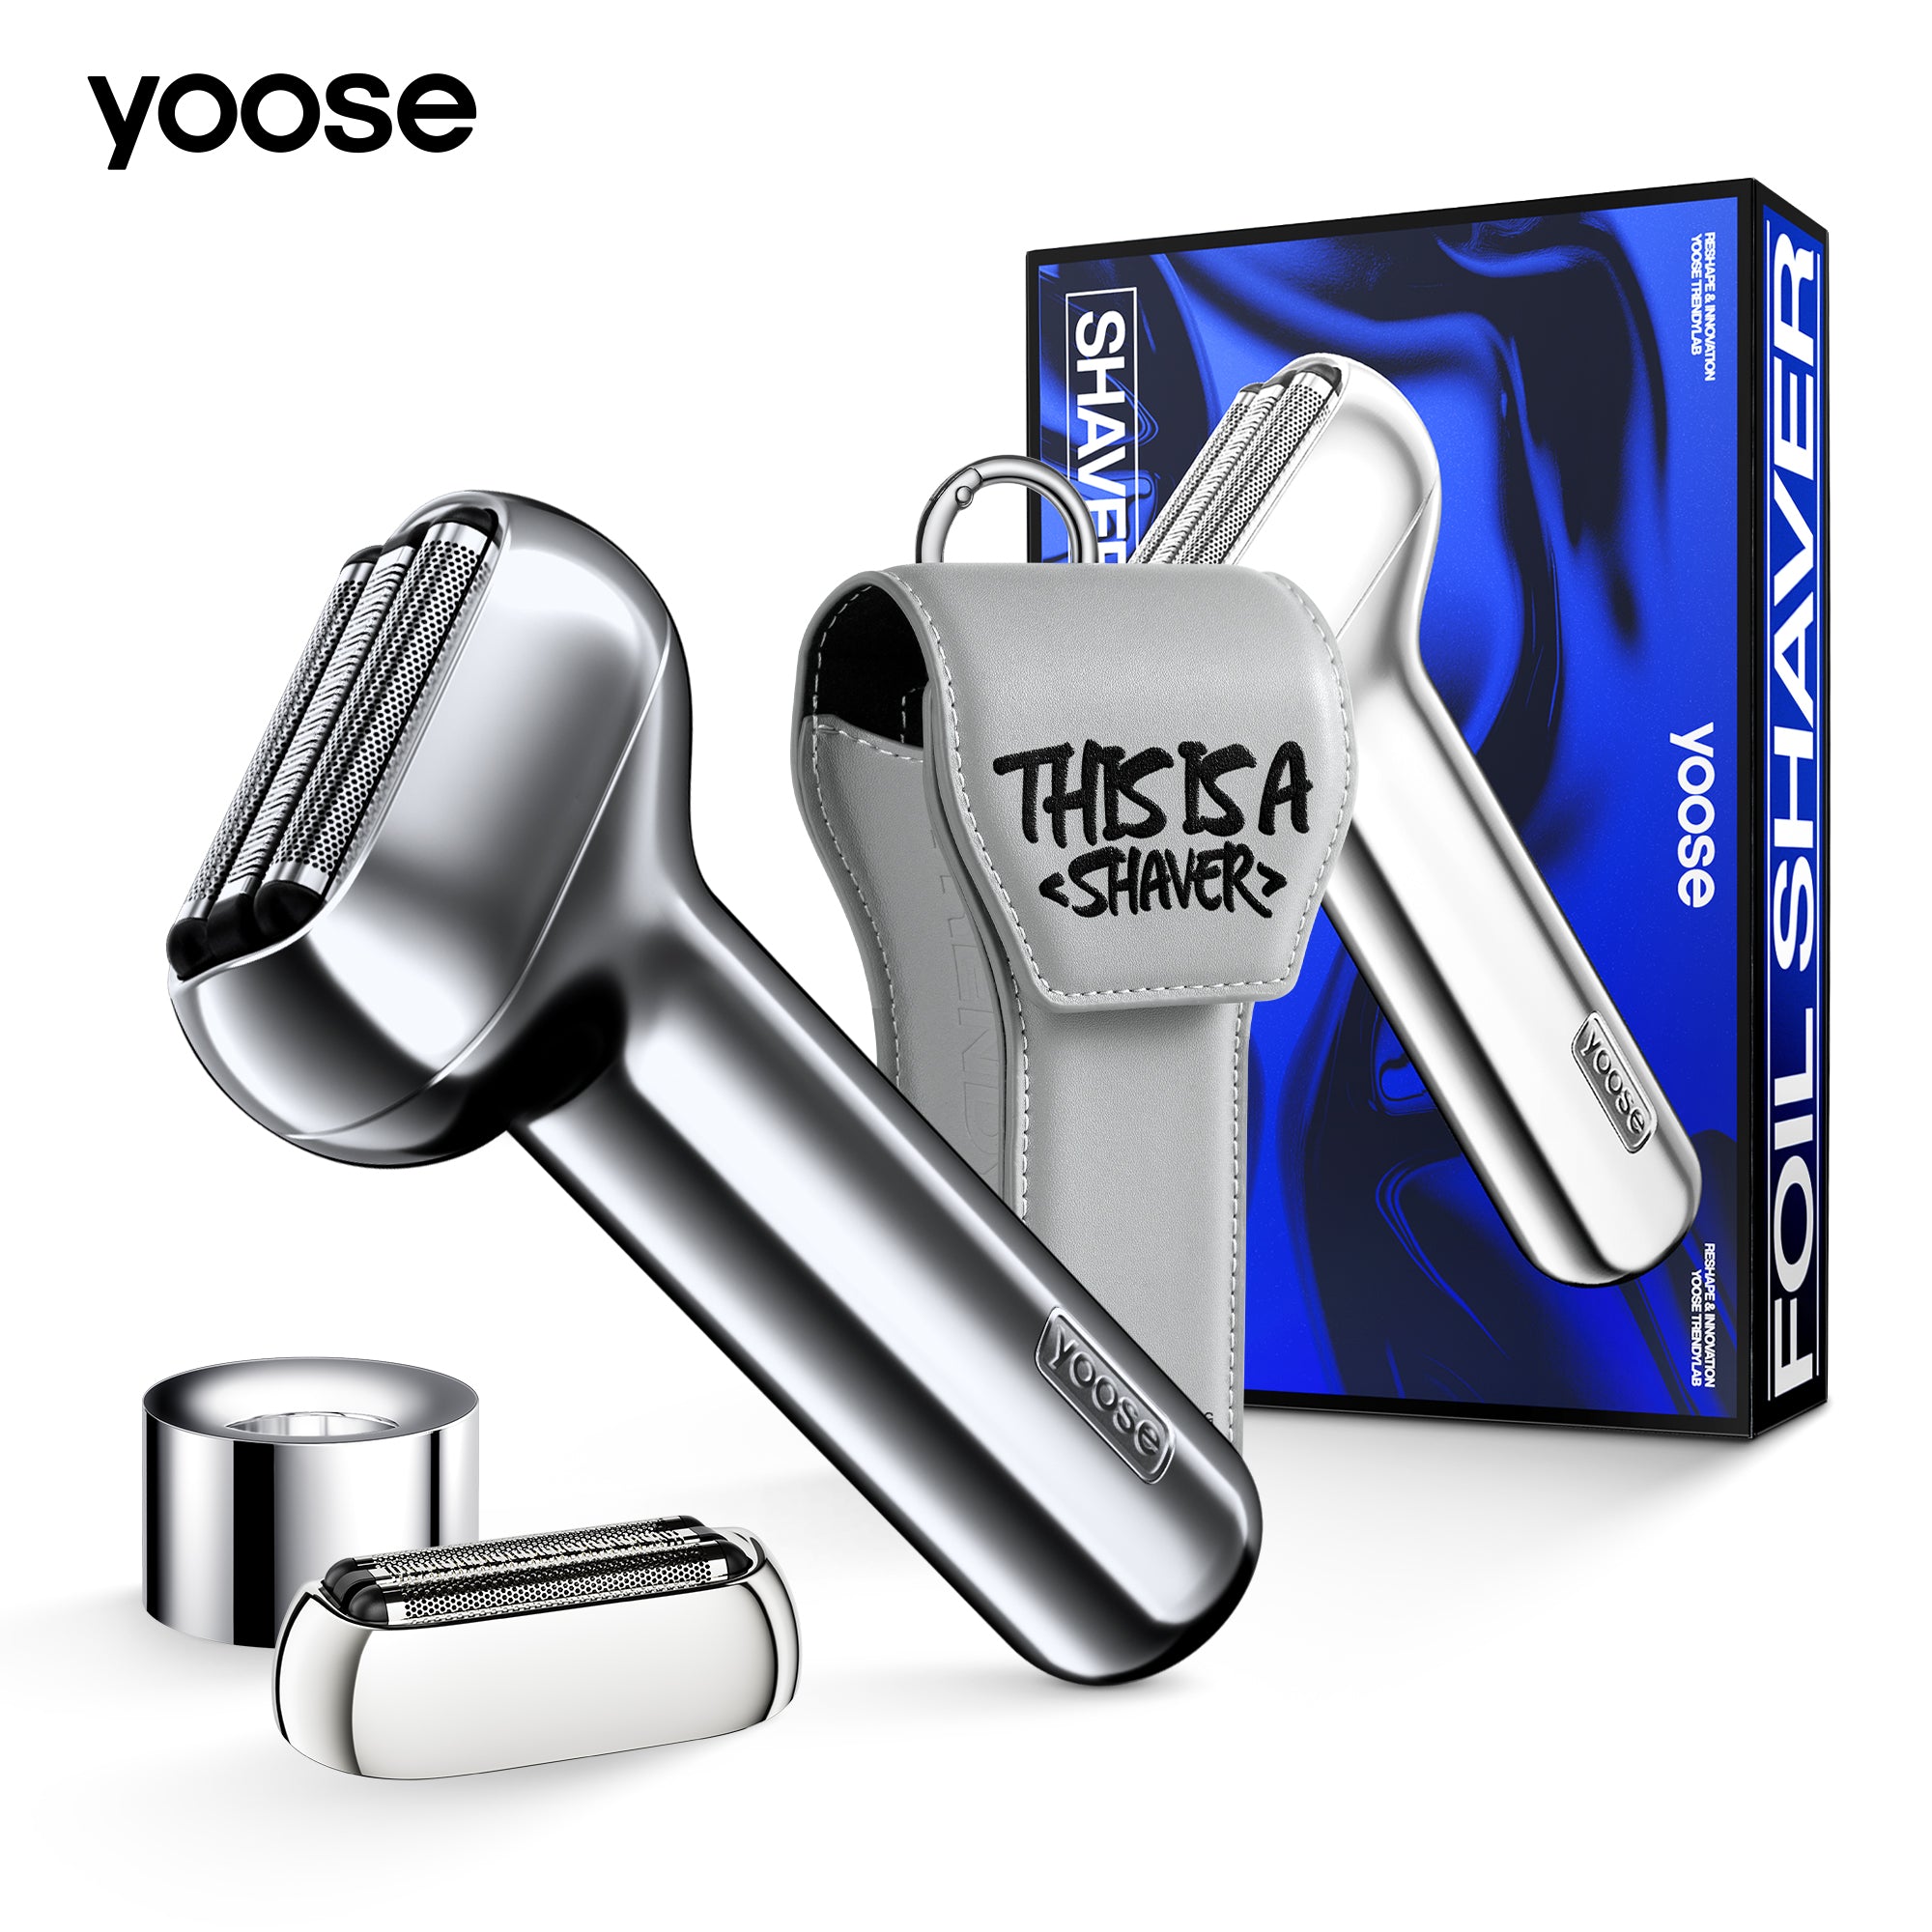 yoose Triple shaver gift box what is includes _Silver color